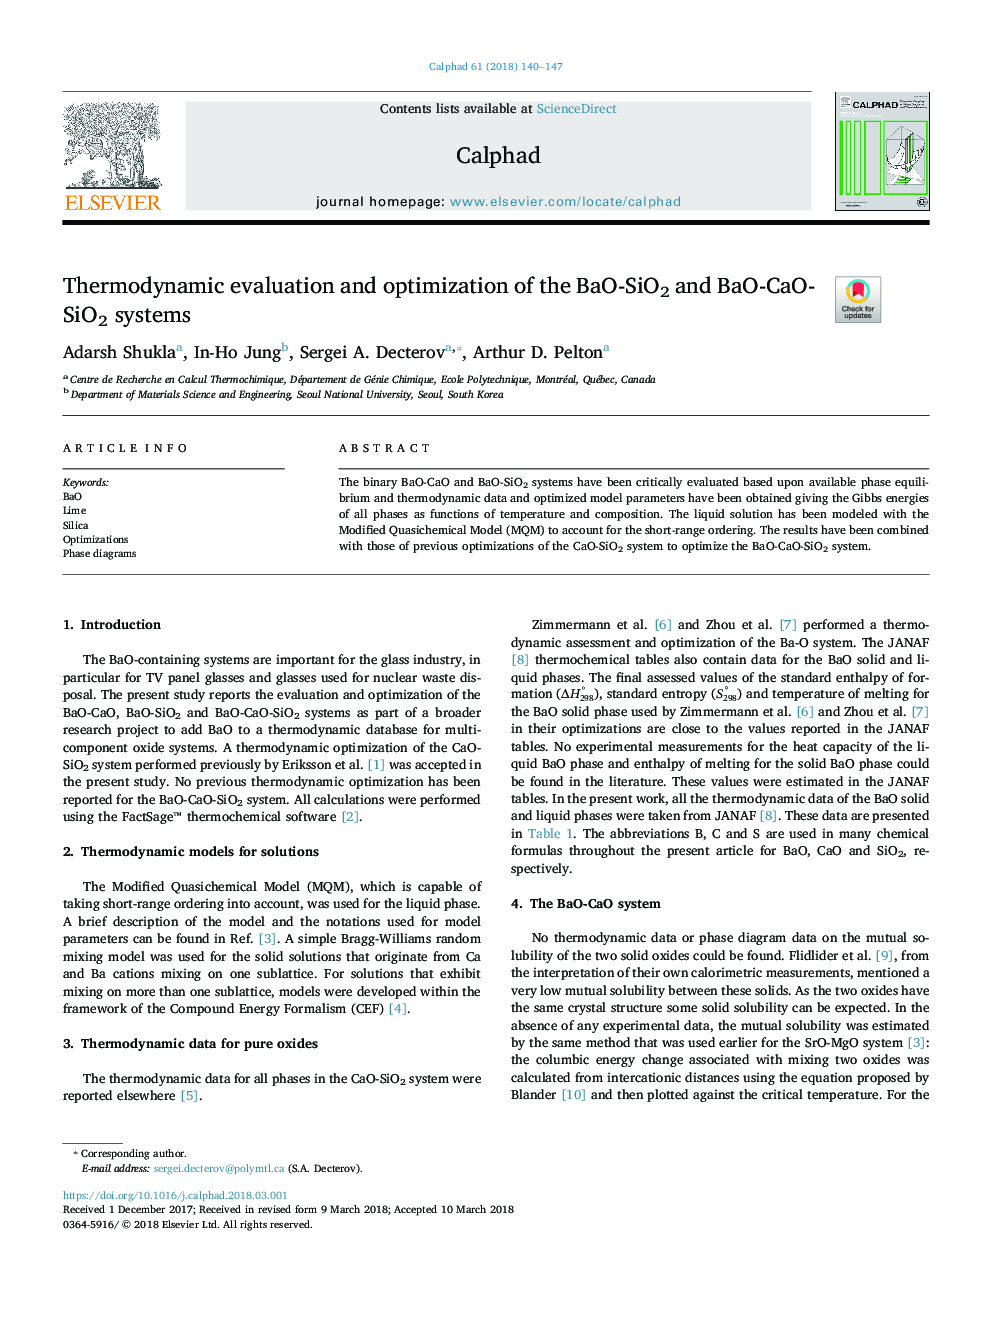 Thermodynamic evaluation and optimization of the BaO-SiO2 and BaO-CaO-SiO2 systems